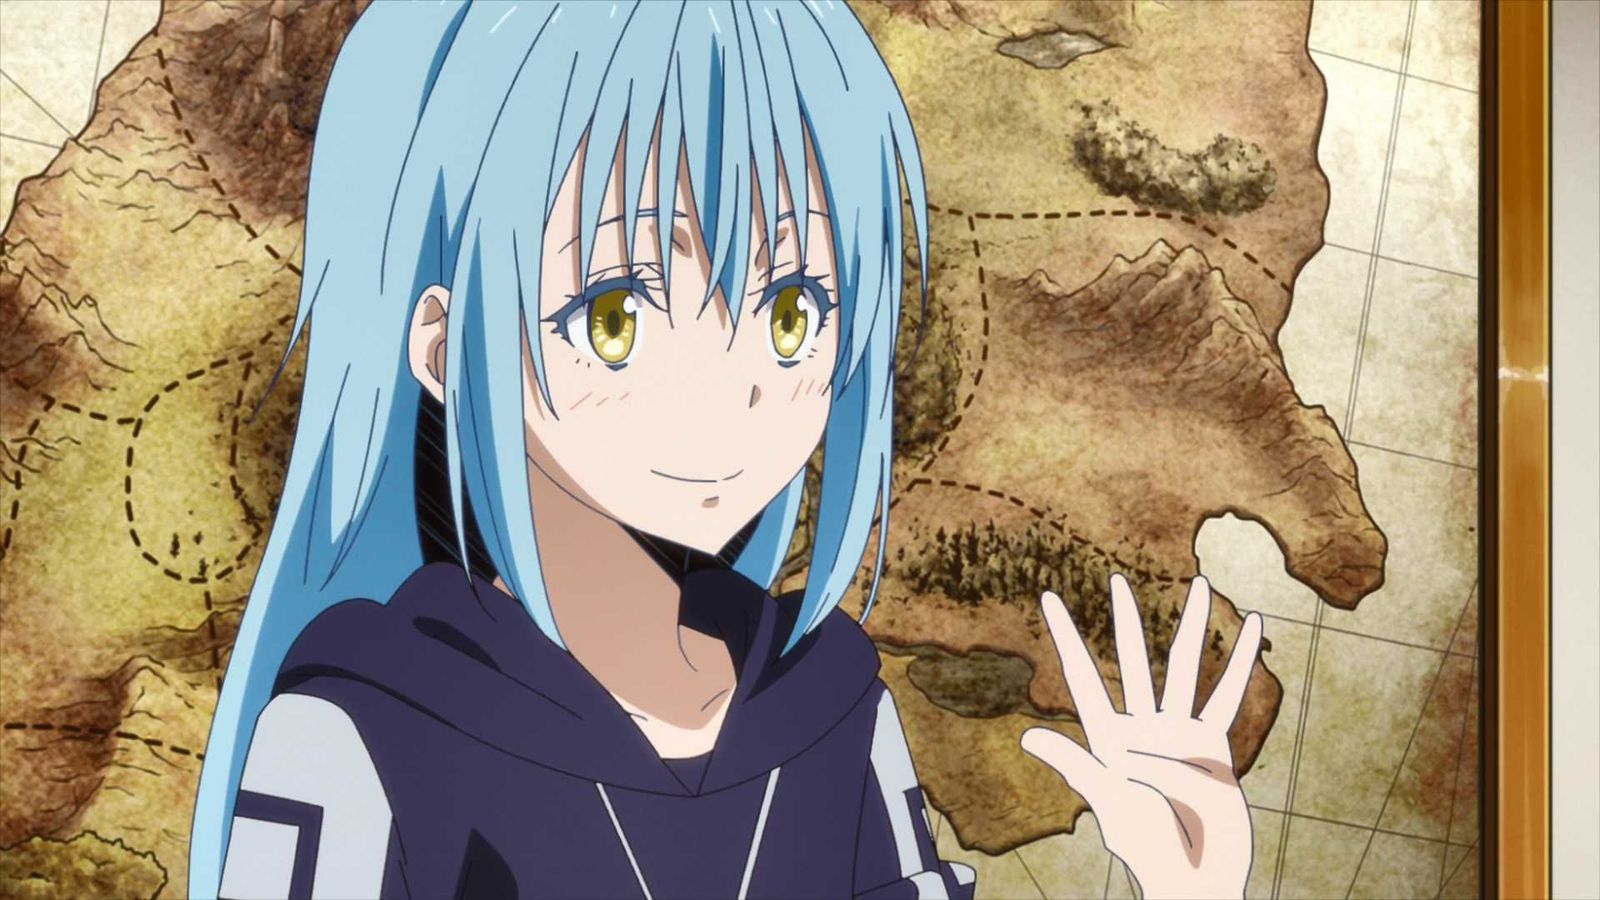 That Time I Got Reincarnated as a Slime Season 2 Part Episode 8 Release Date and Time